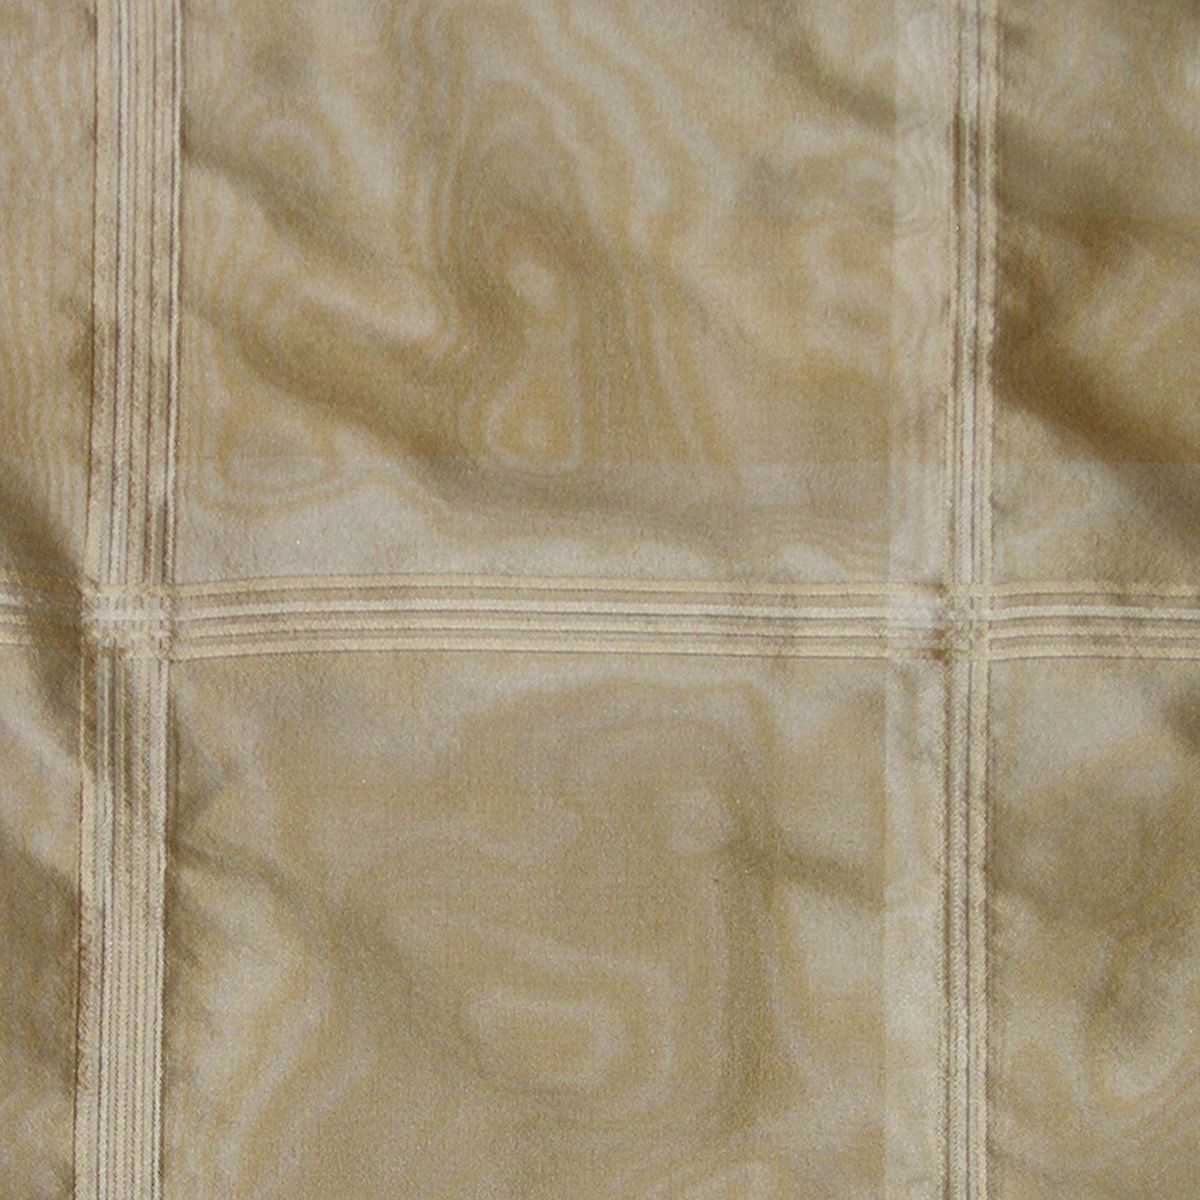 Iridescent Plaid fabric in champagne color - pattern number HB 00011540 - by Scalamandre in the Old World Weavers collection